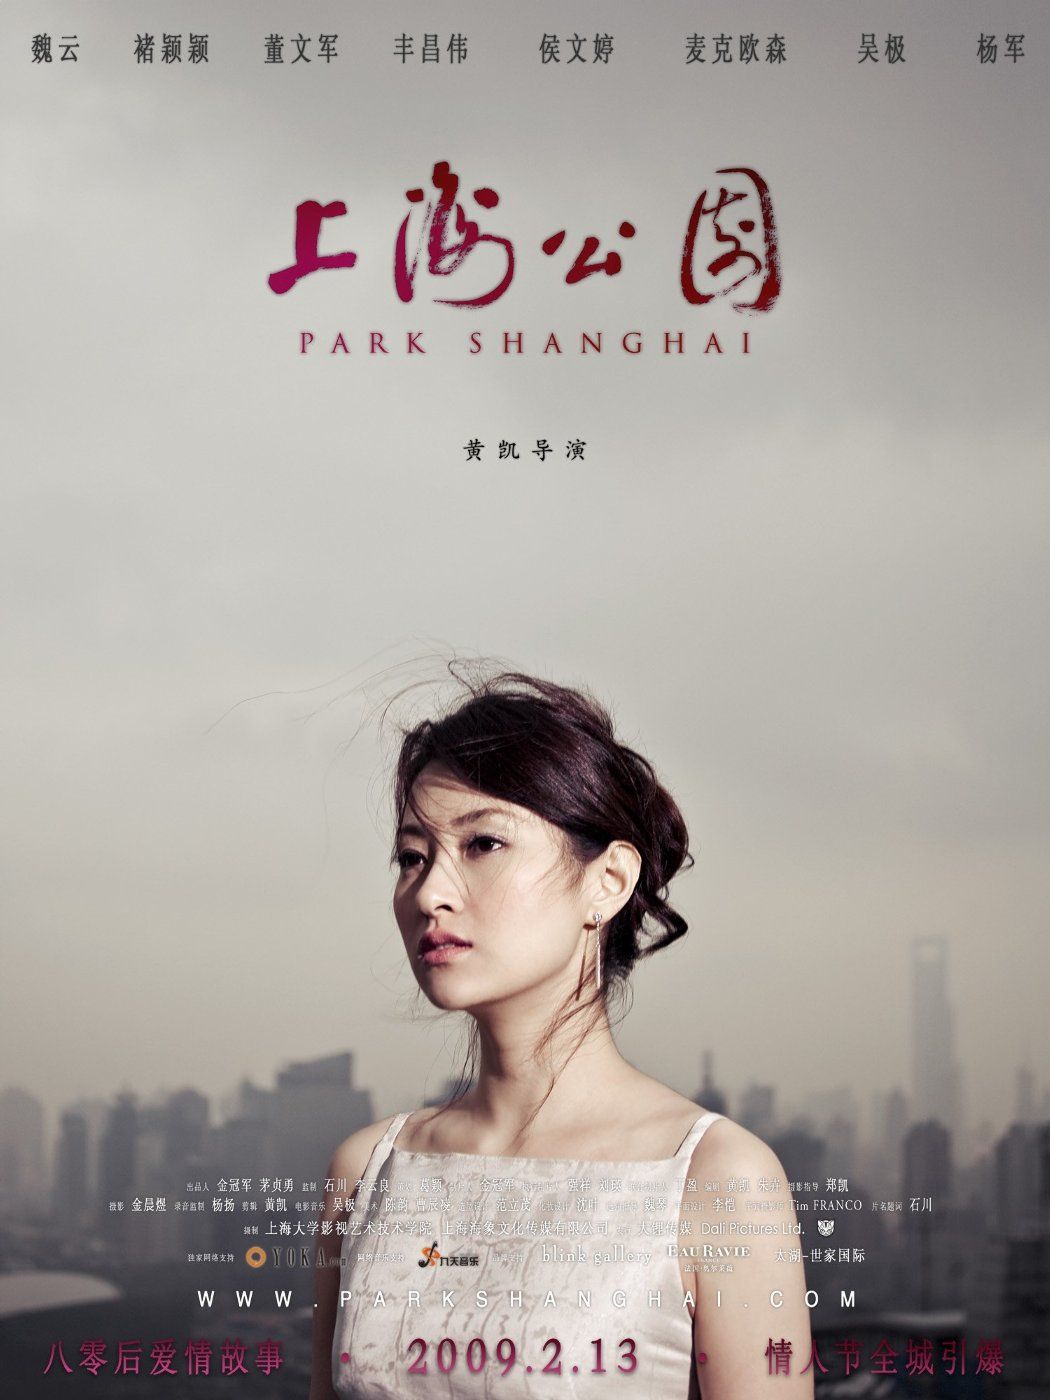 Extra Large Movie Poster Image for Park Shanghai 